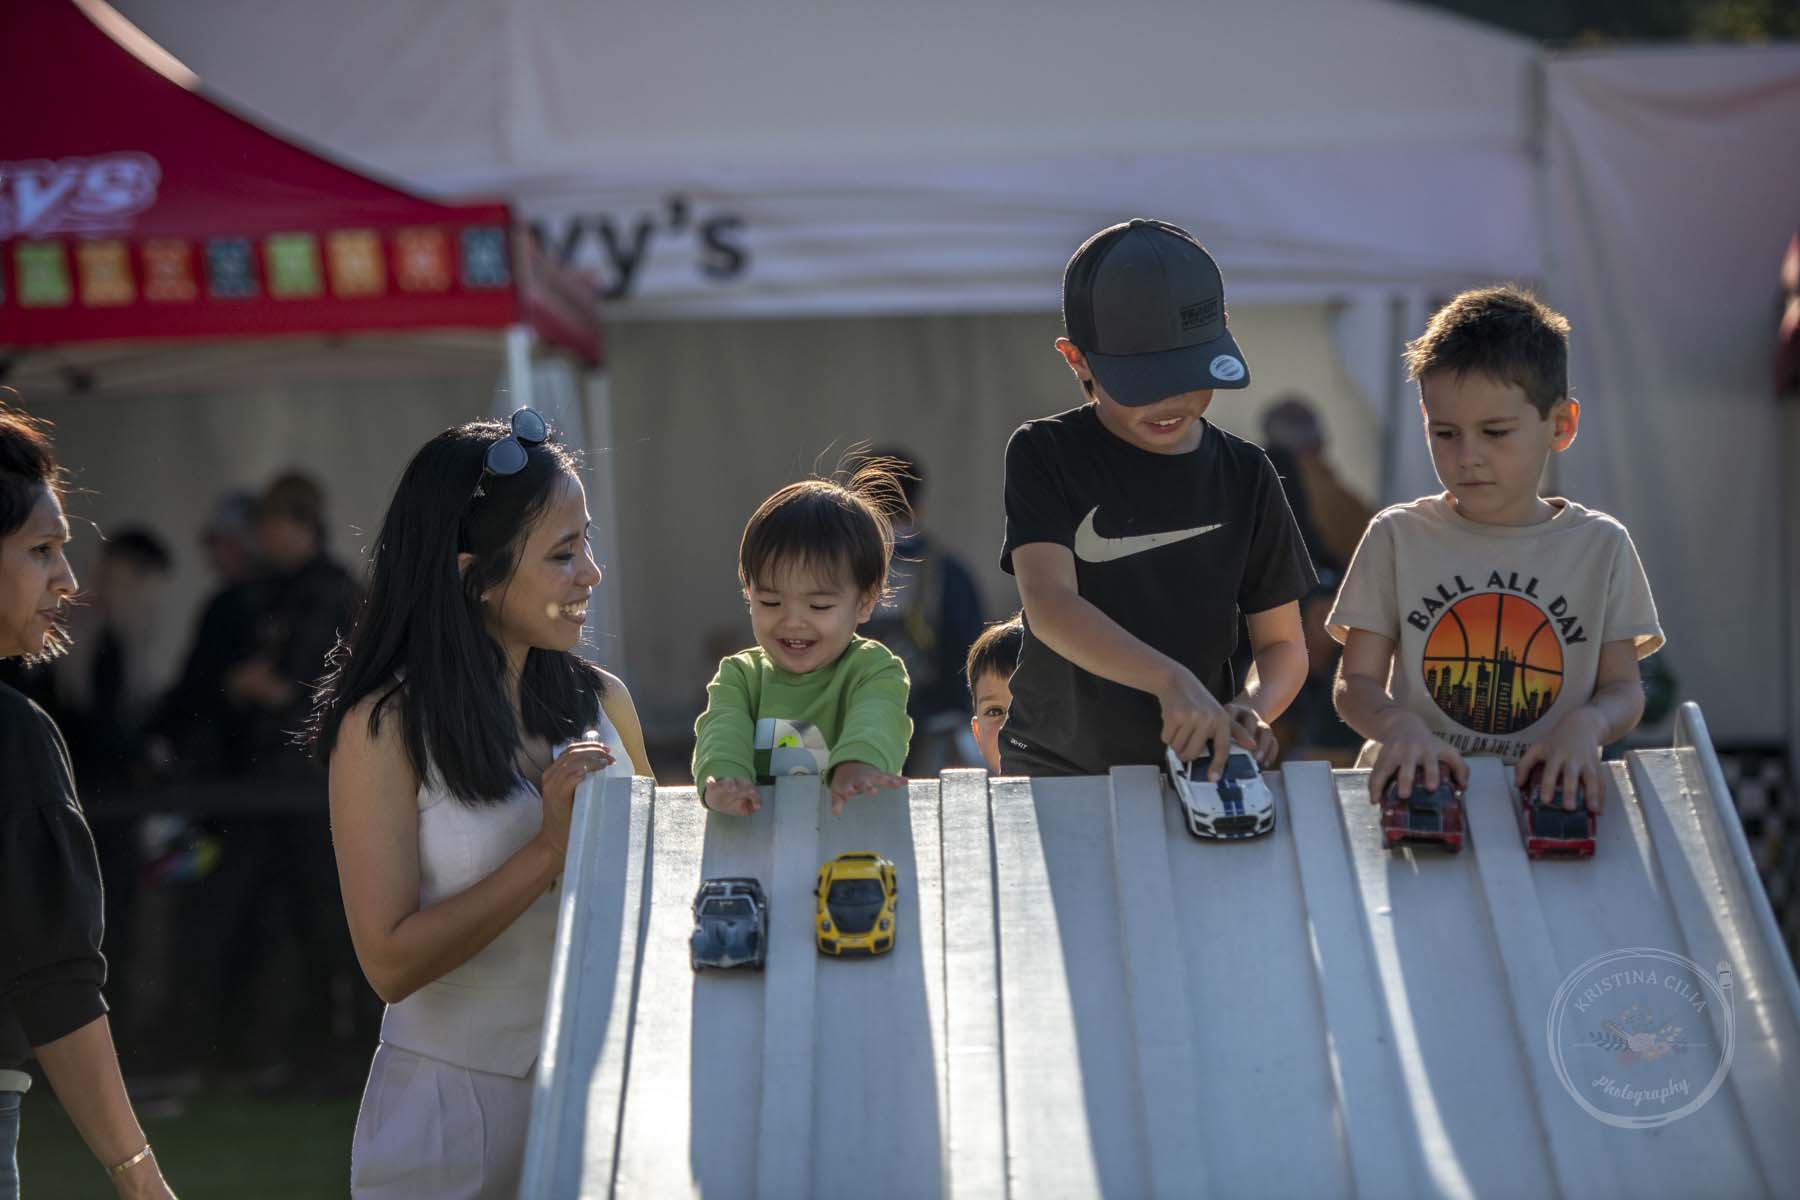 Kids enjoy playing with the toy racecars during Velocity Invitational 2023 at Sonoma Raceway